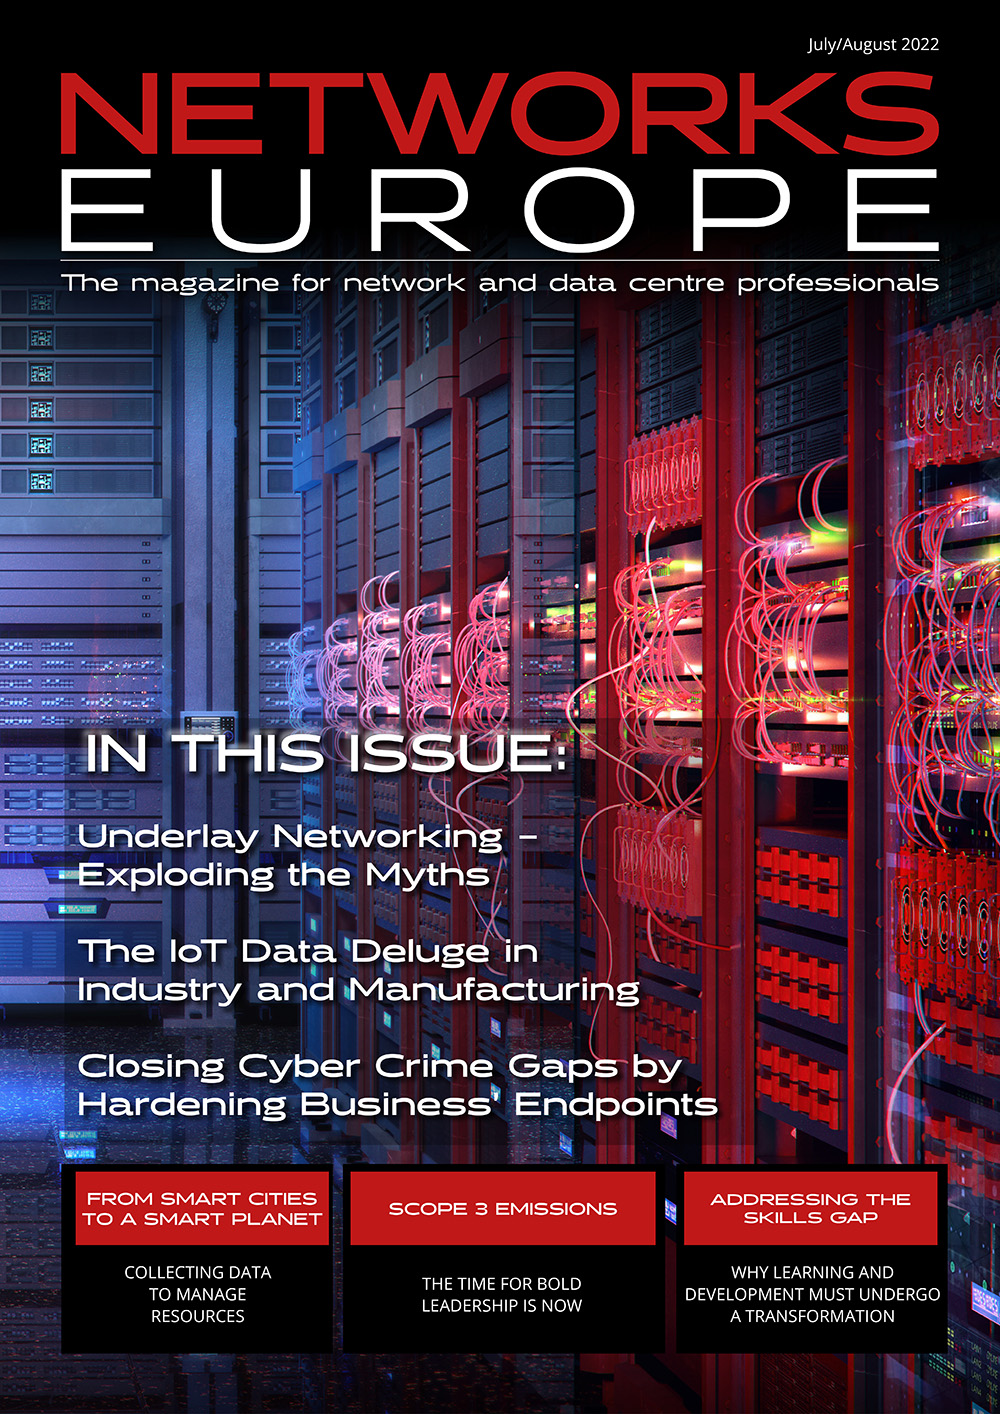 Networks Europe Magazine - July-August 2022 Issue